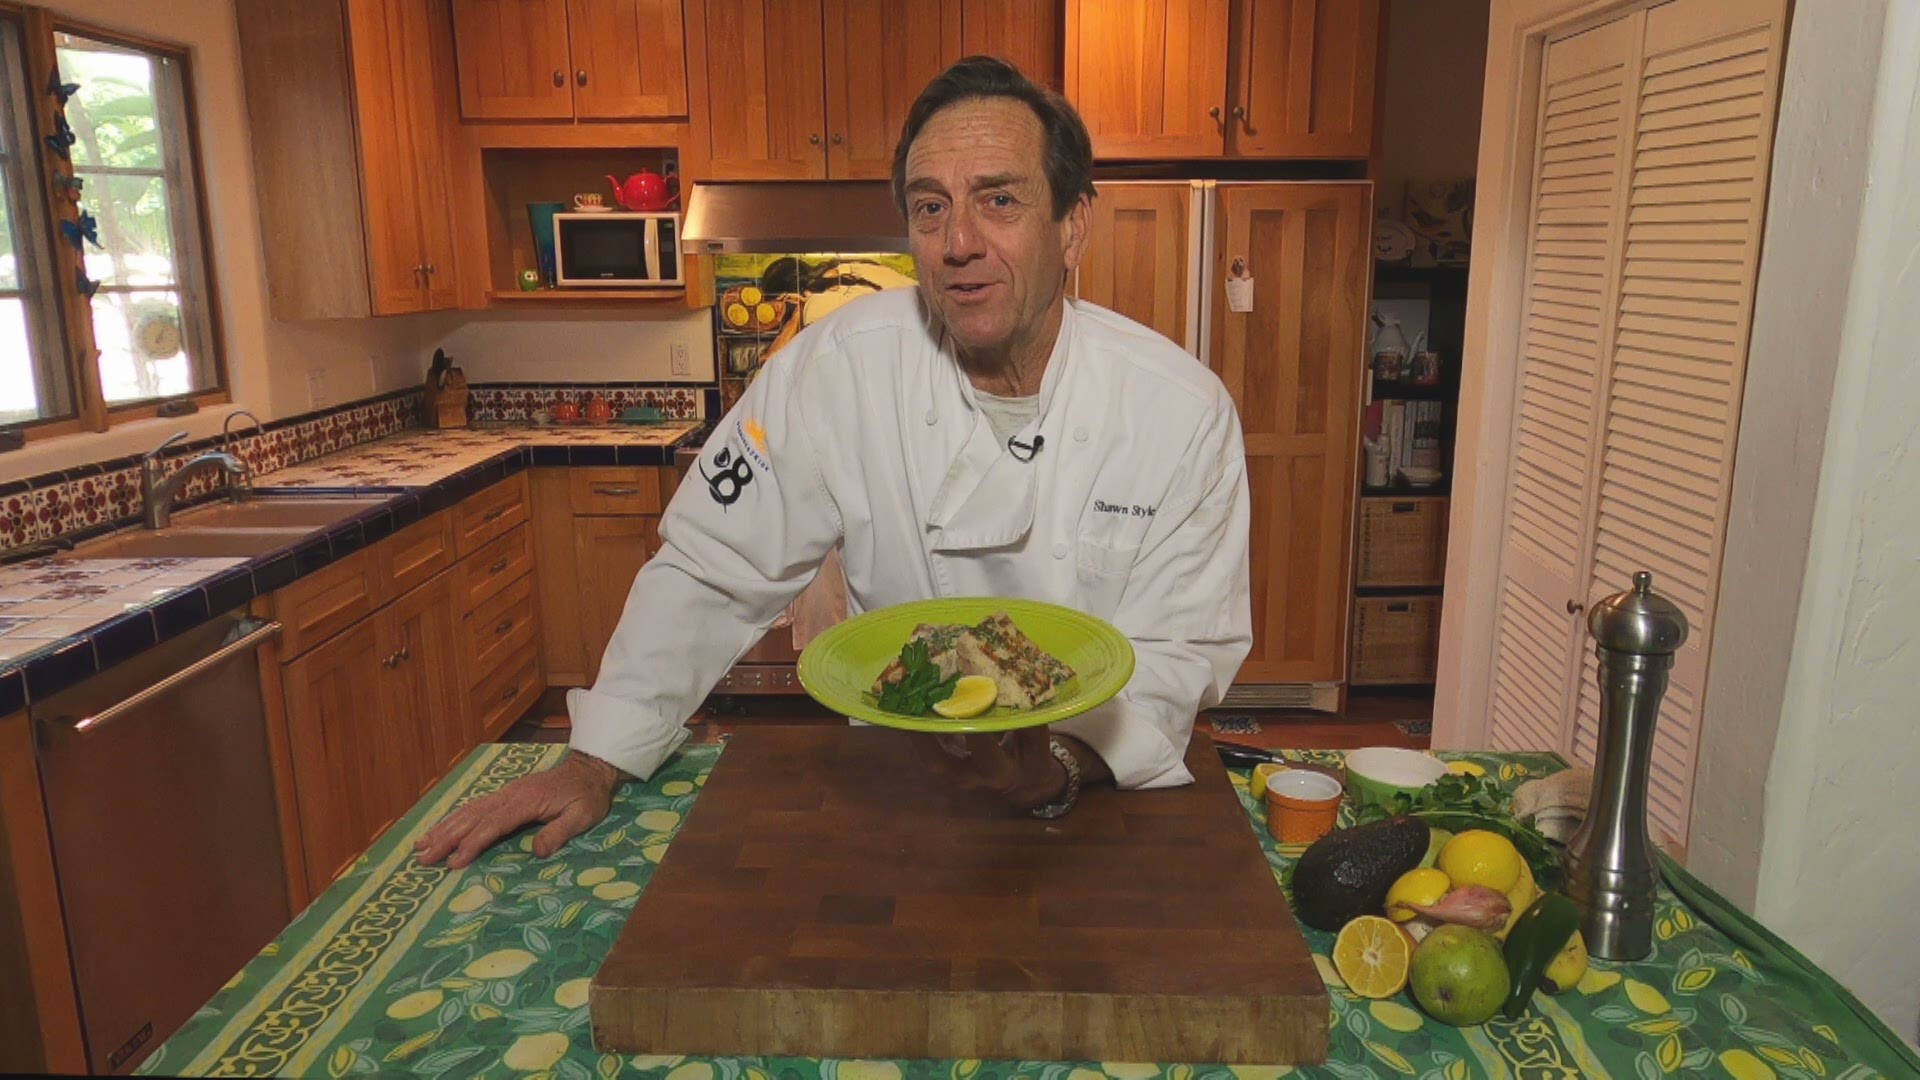 Yellowtail recipe from CBS 8's Shawn Styles